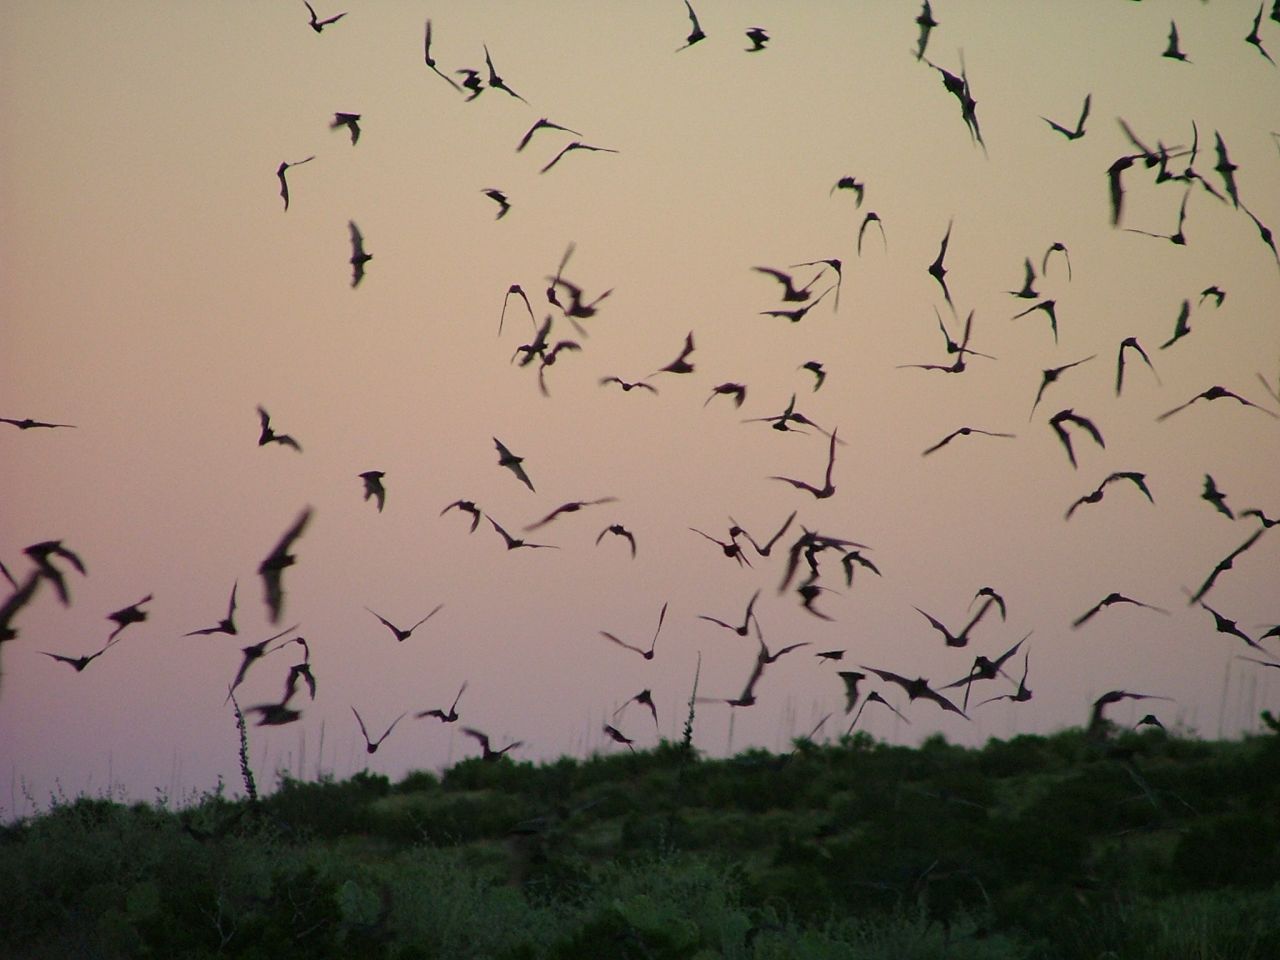 The bats swirl out of the cave just before dusk to hunt and return gorged with food before dawn.